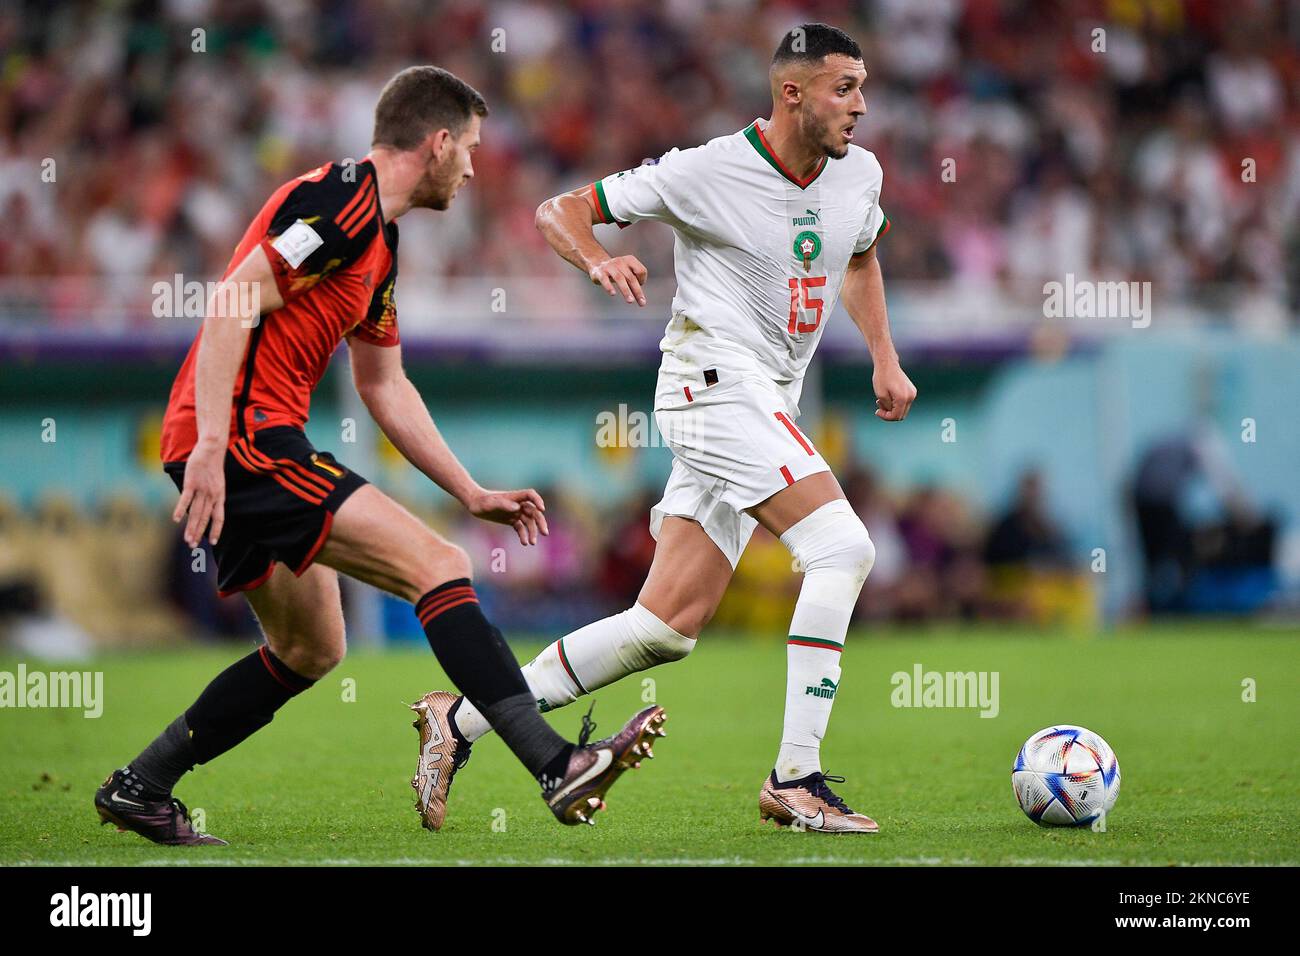 DOHA, QATAR - NOVEMBER 27: Jan Vertonghen of Belgium battles for the ball with Selim Amallah of Morocco during the Group F - FIFA World Cup Qatar 2022 match between Belgium and Morocco at the Al Thumama Stadium on November 27, 2022 in Doha, Qatar (Photo by Pablo Morano/BSR Agency) Stock Photo